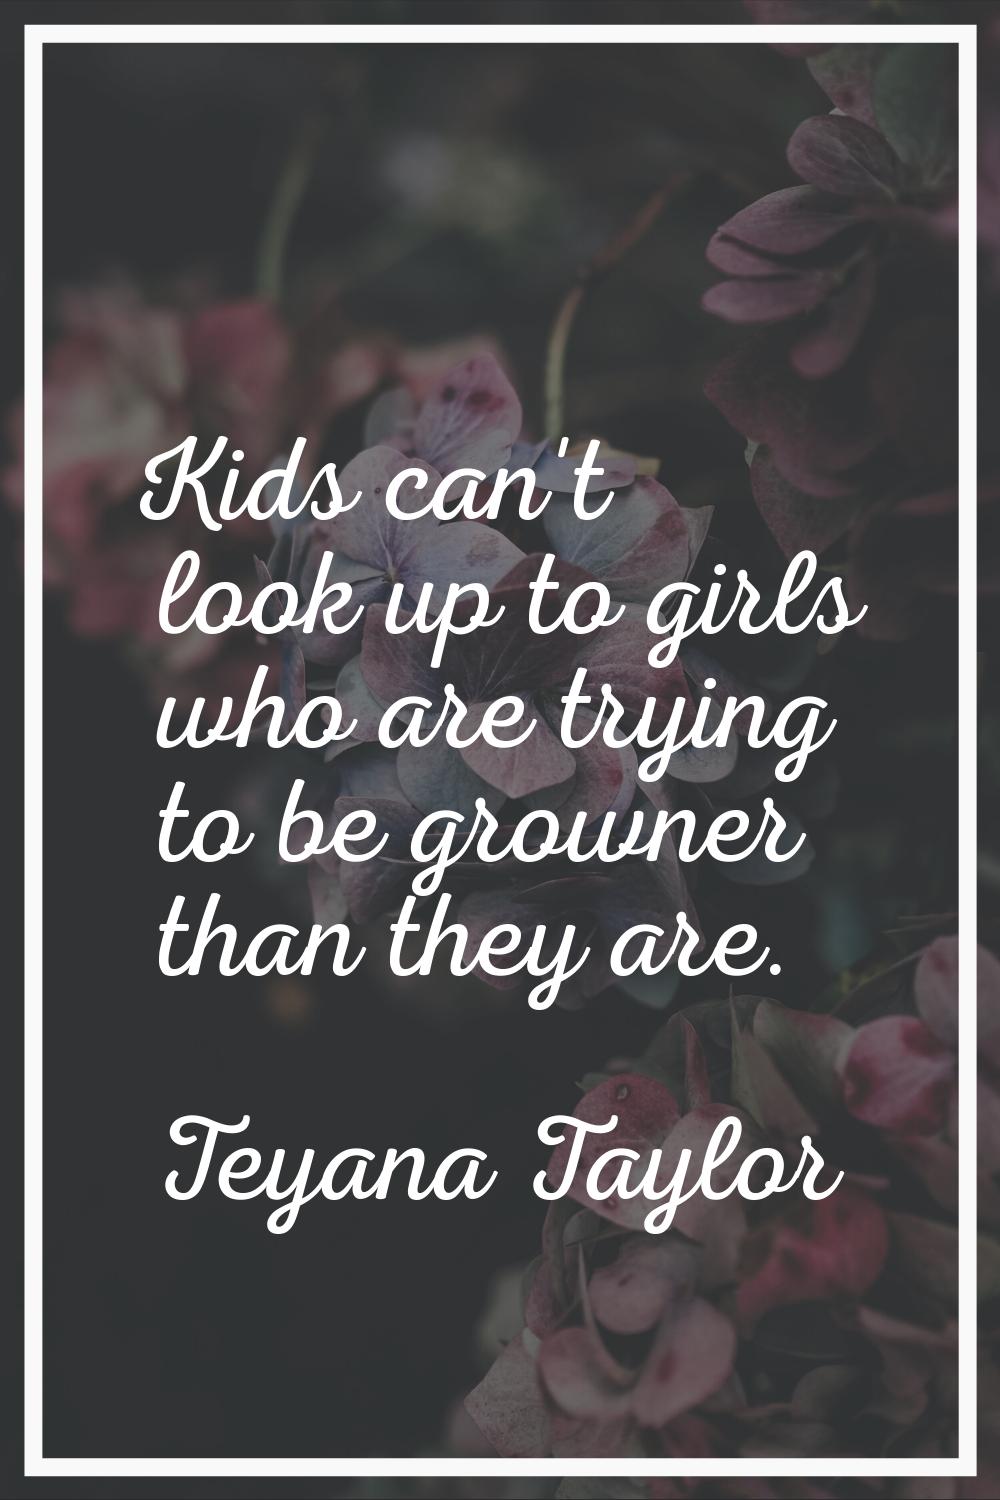 Kids can't look up to girls who are trying to be growner than they are.